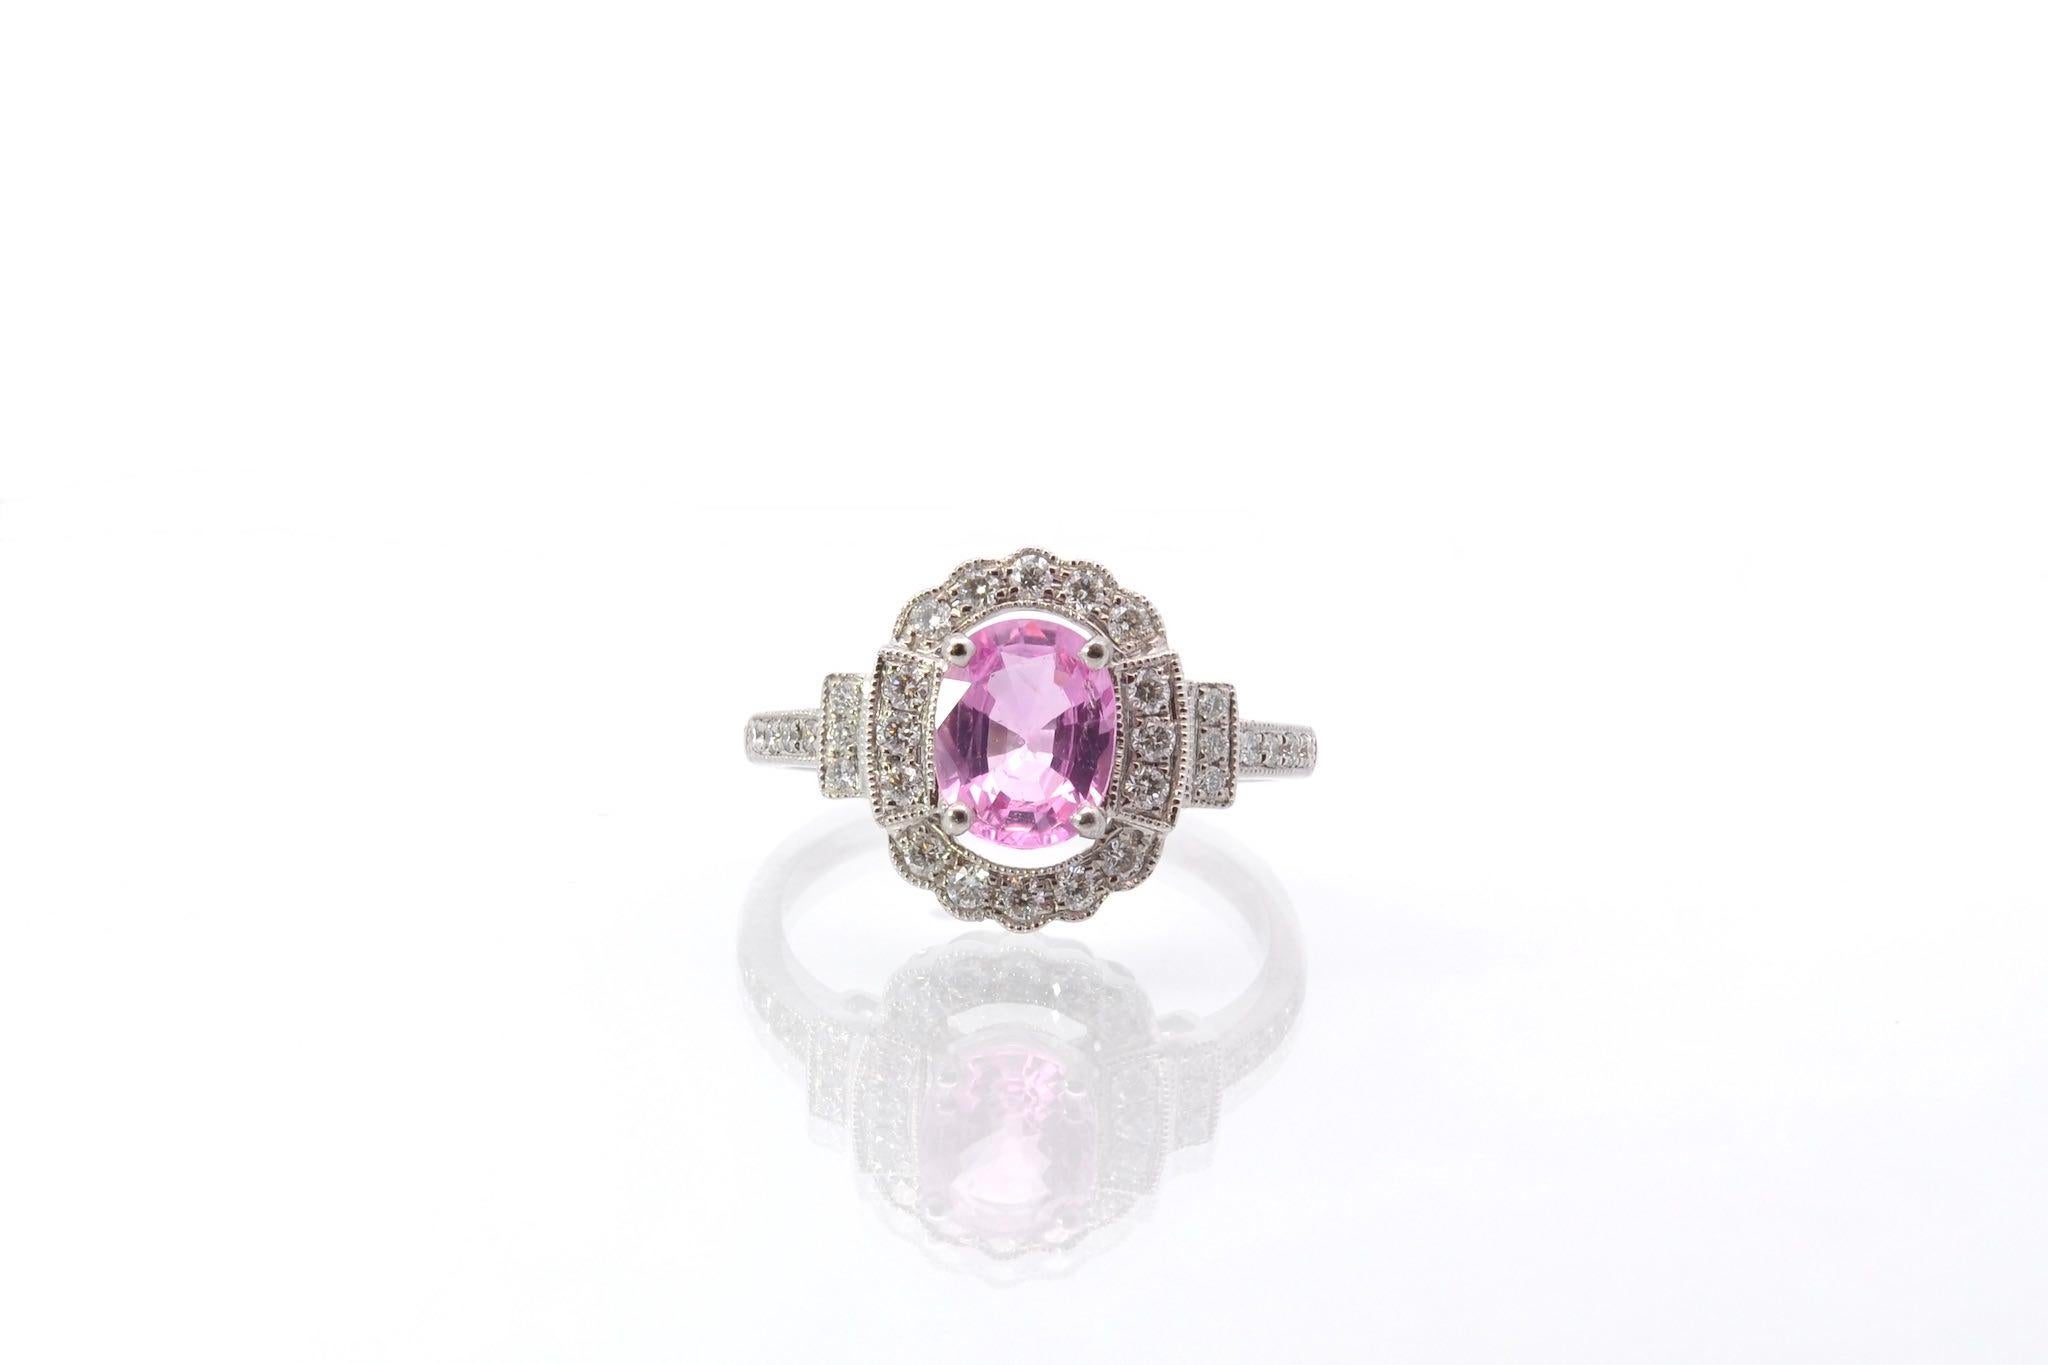 Stones: Oval pink sapphire: 1.19 cts, 30 diamonds: 0.30 ct
Material: 18k white gold
Dimensions: 1.2 x 1cm
Weight: 3.6g
Period: Recent vintage style
Size: 52 (free sizing)
Certificate
Ref. : 25566